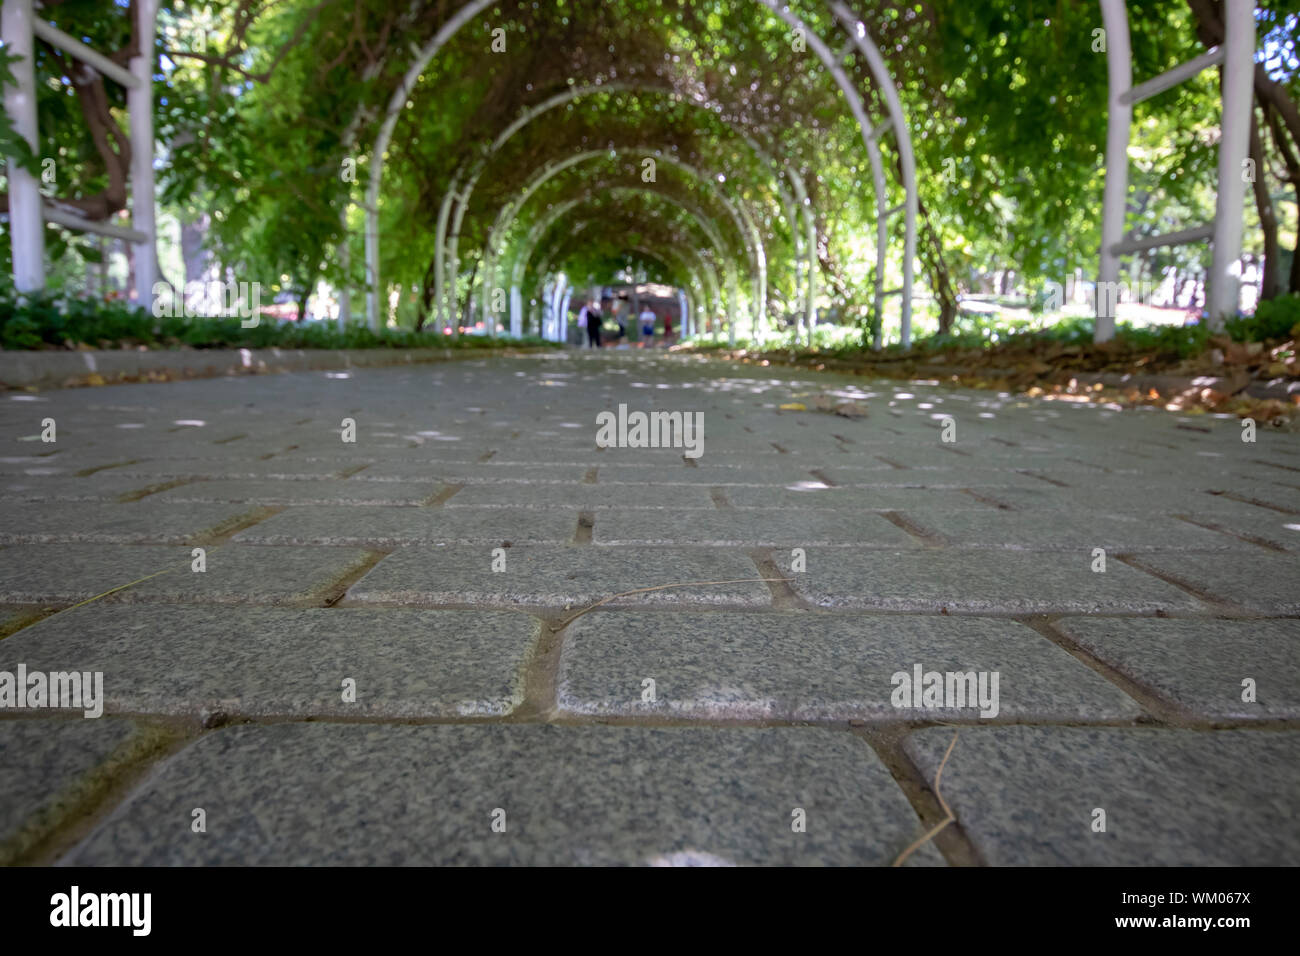 Ivy covered tunnel. Close-up of stone parquets. Blurred people in the background. Stock Photo